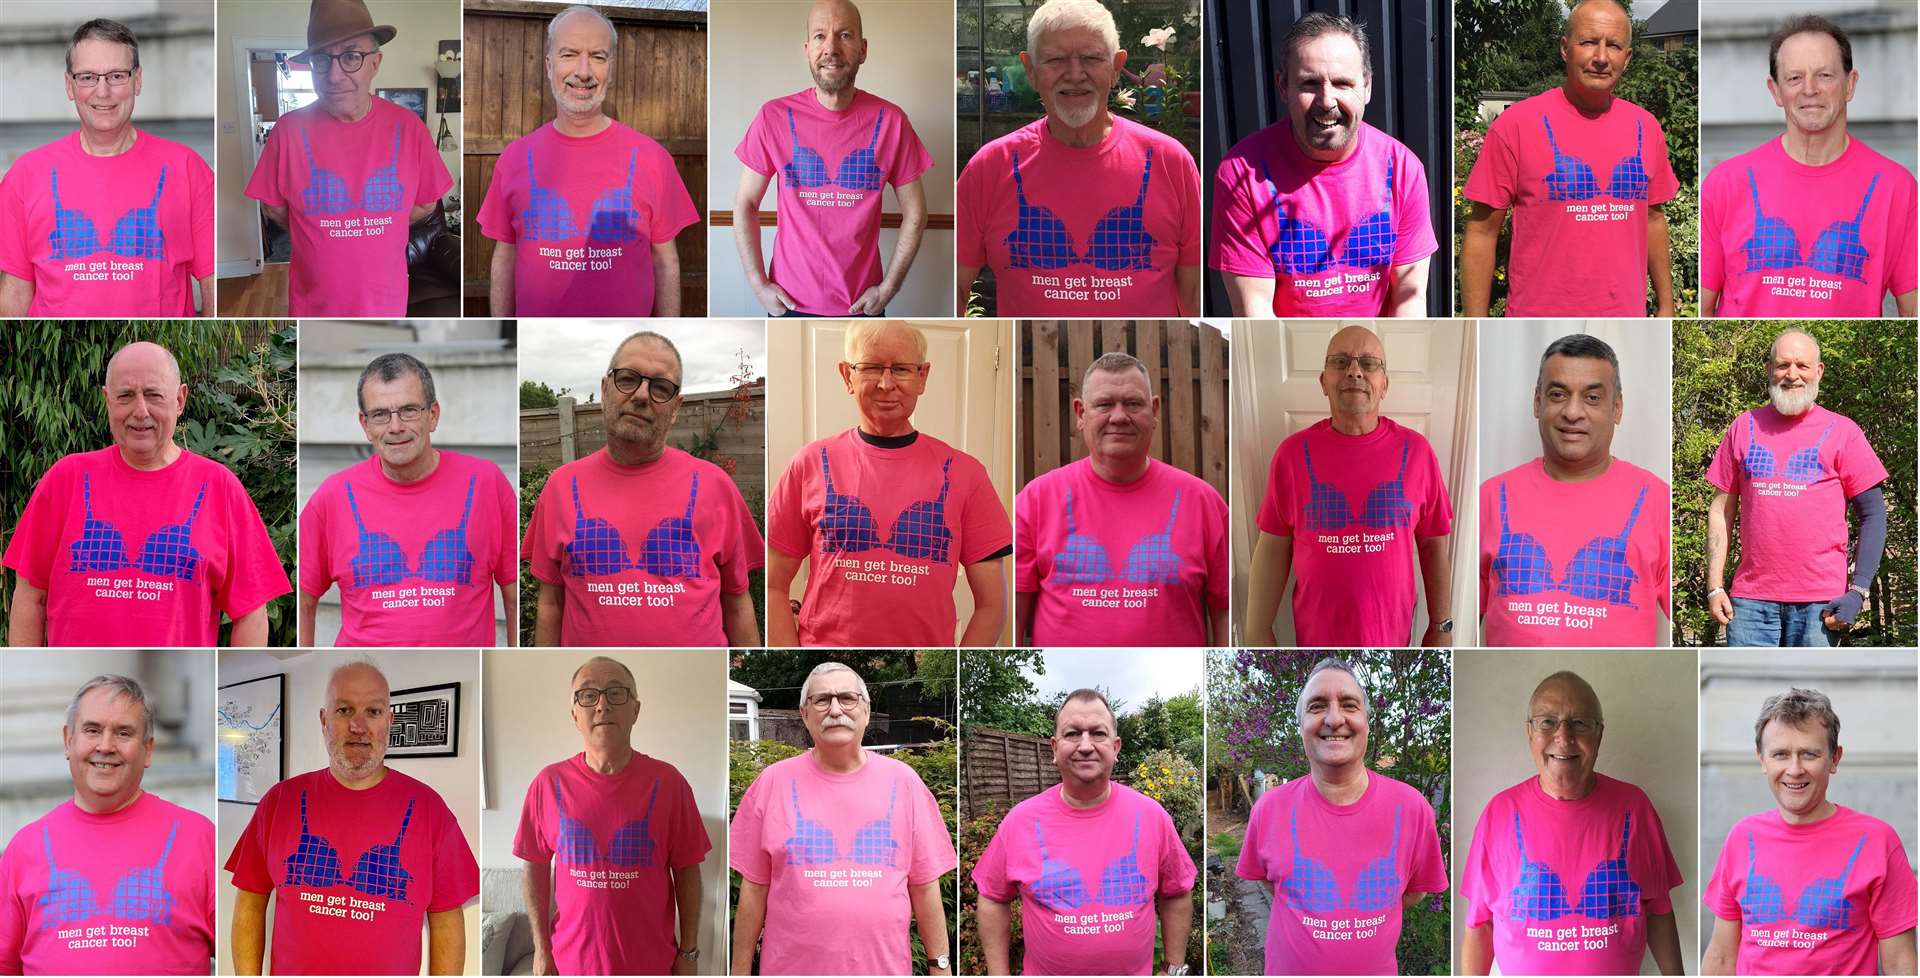 All 24 members of Walk the Walk's "Men get Breast Cancer too" campaign, with Mr Weaver pictured on the bottom row, fourth from right. Picture supplied by Walk the Walk